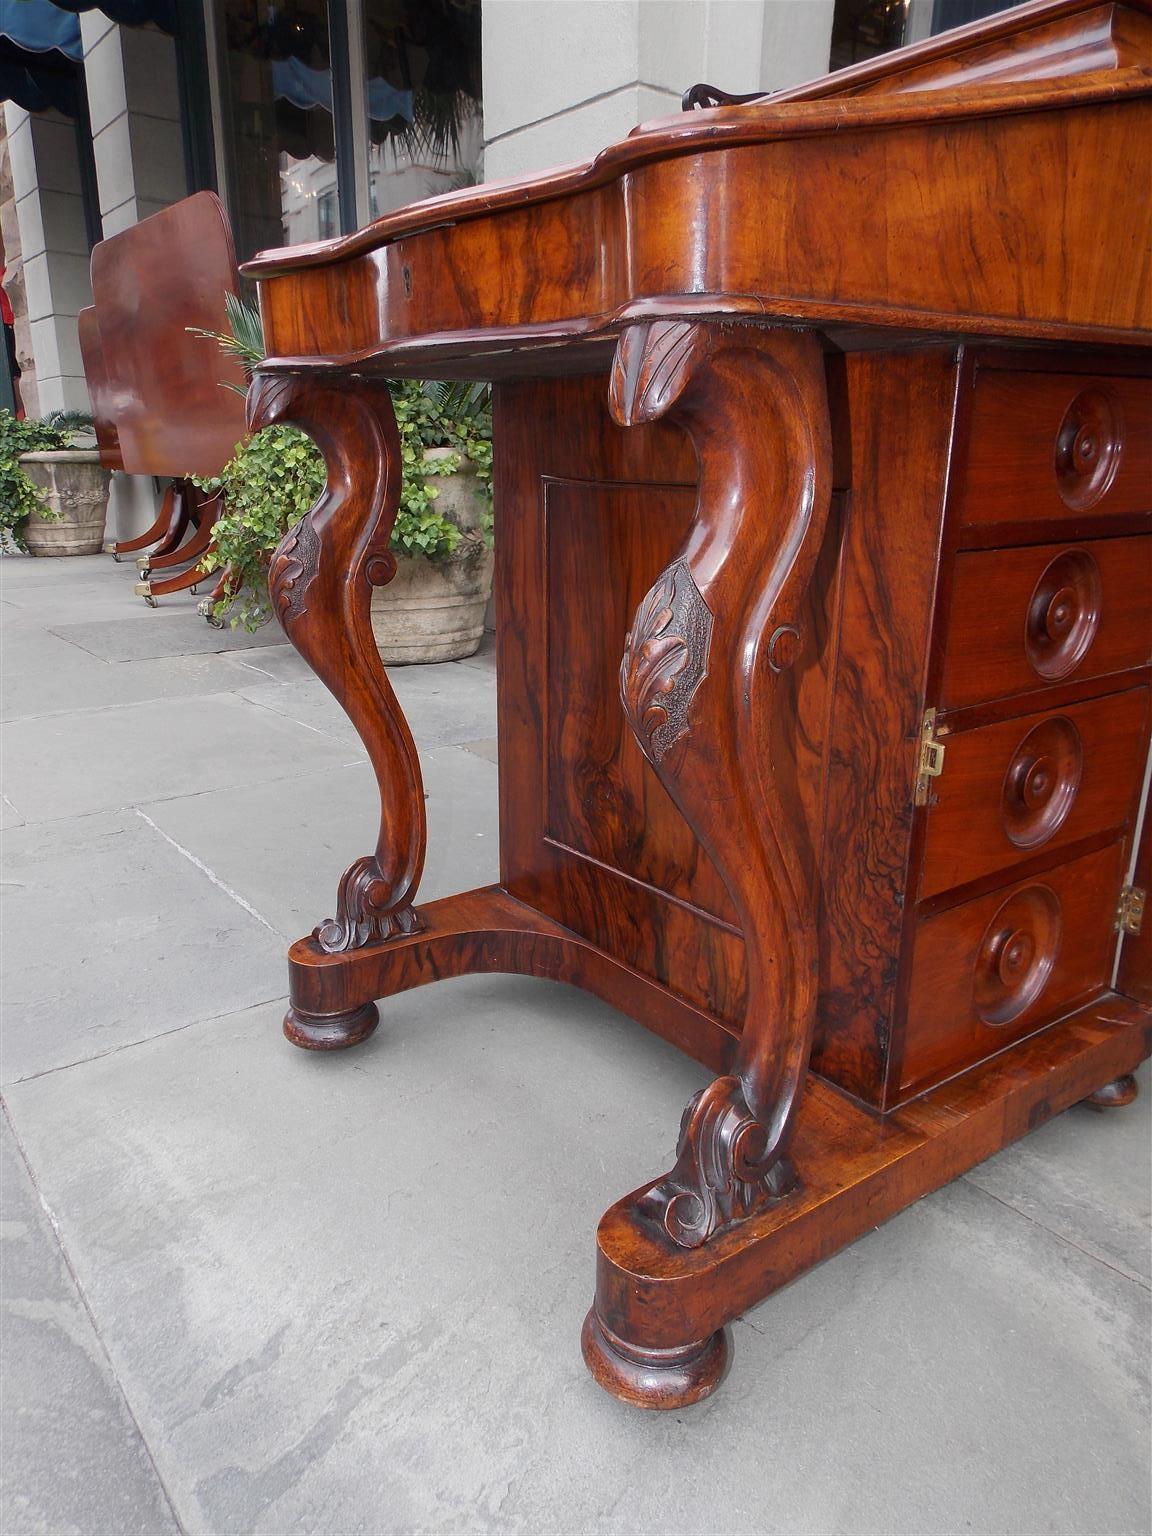 English Burl Walnut Leather Top Davenport with Acanthus Cabriole Legs Circa 1840 For Sale 2